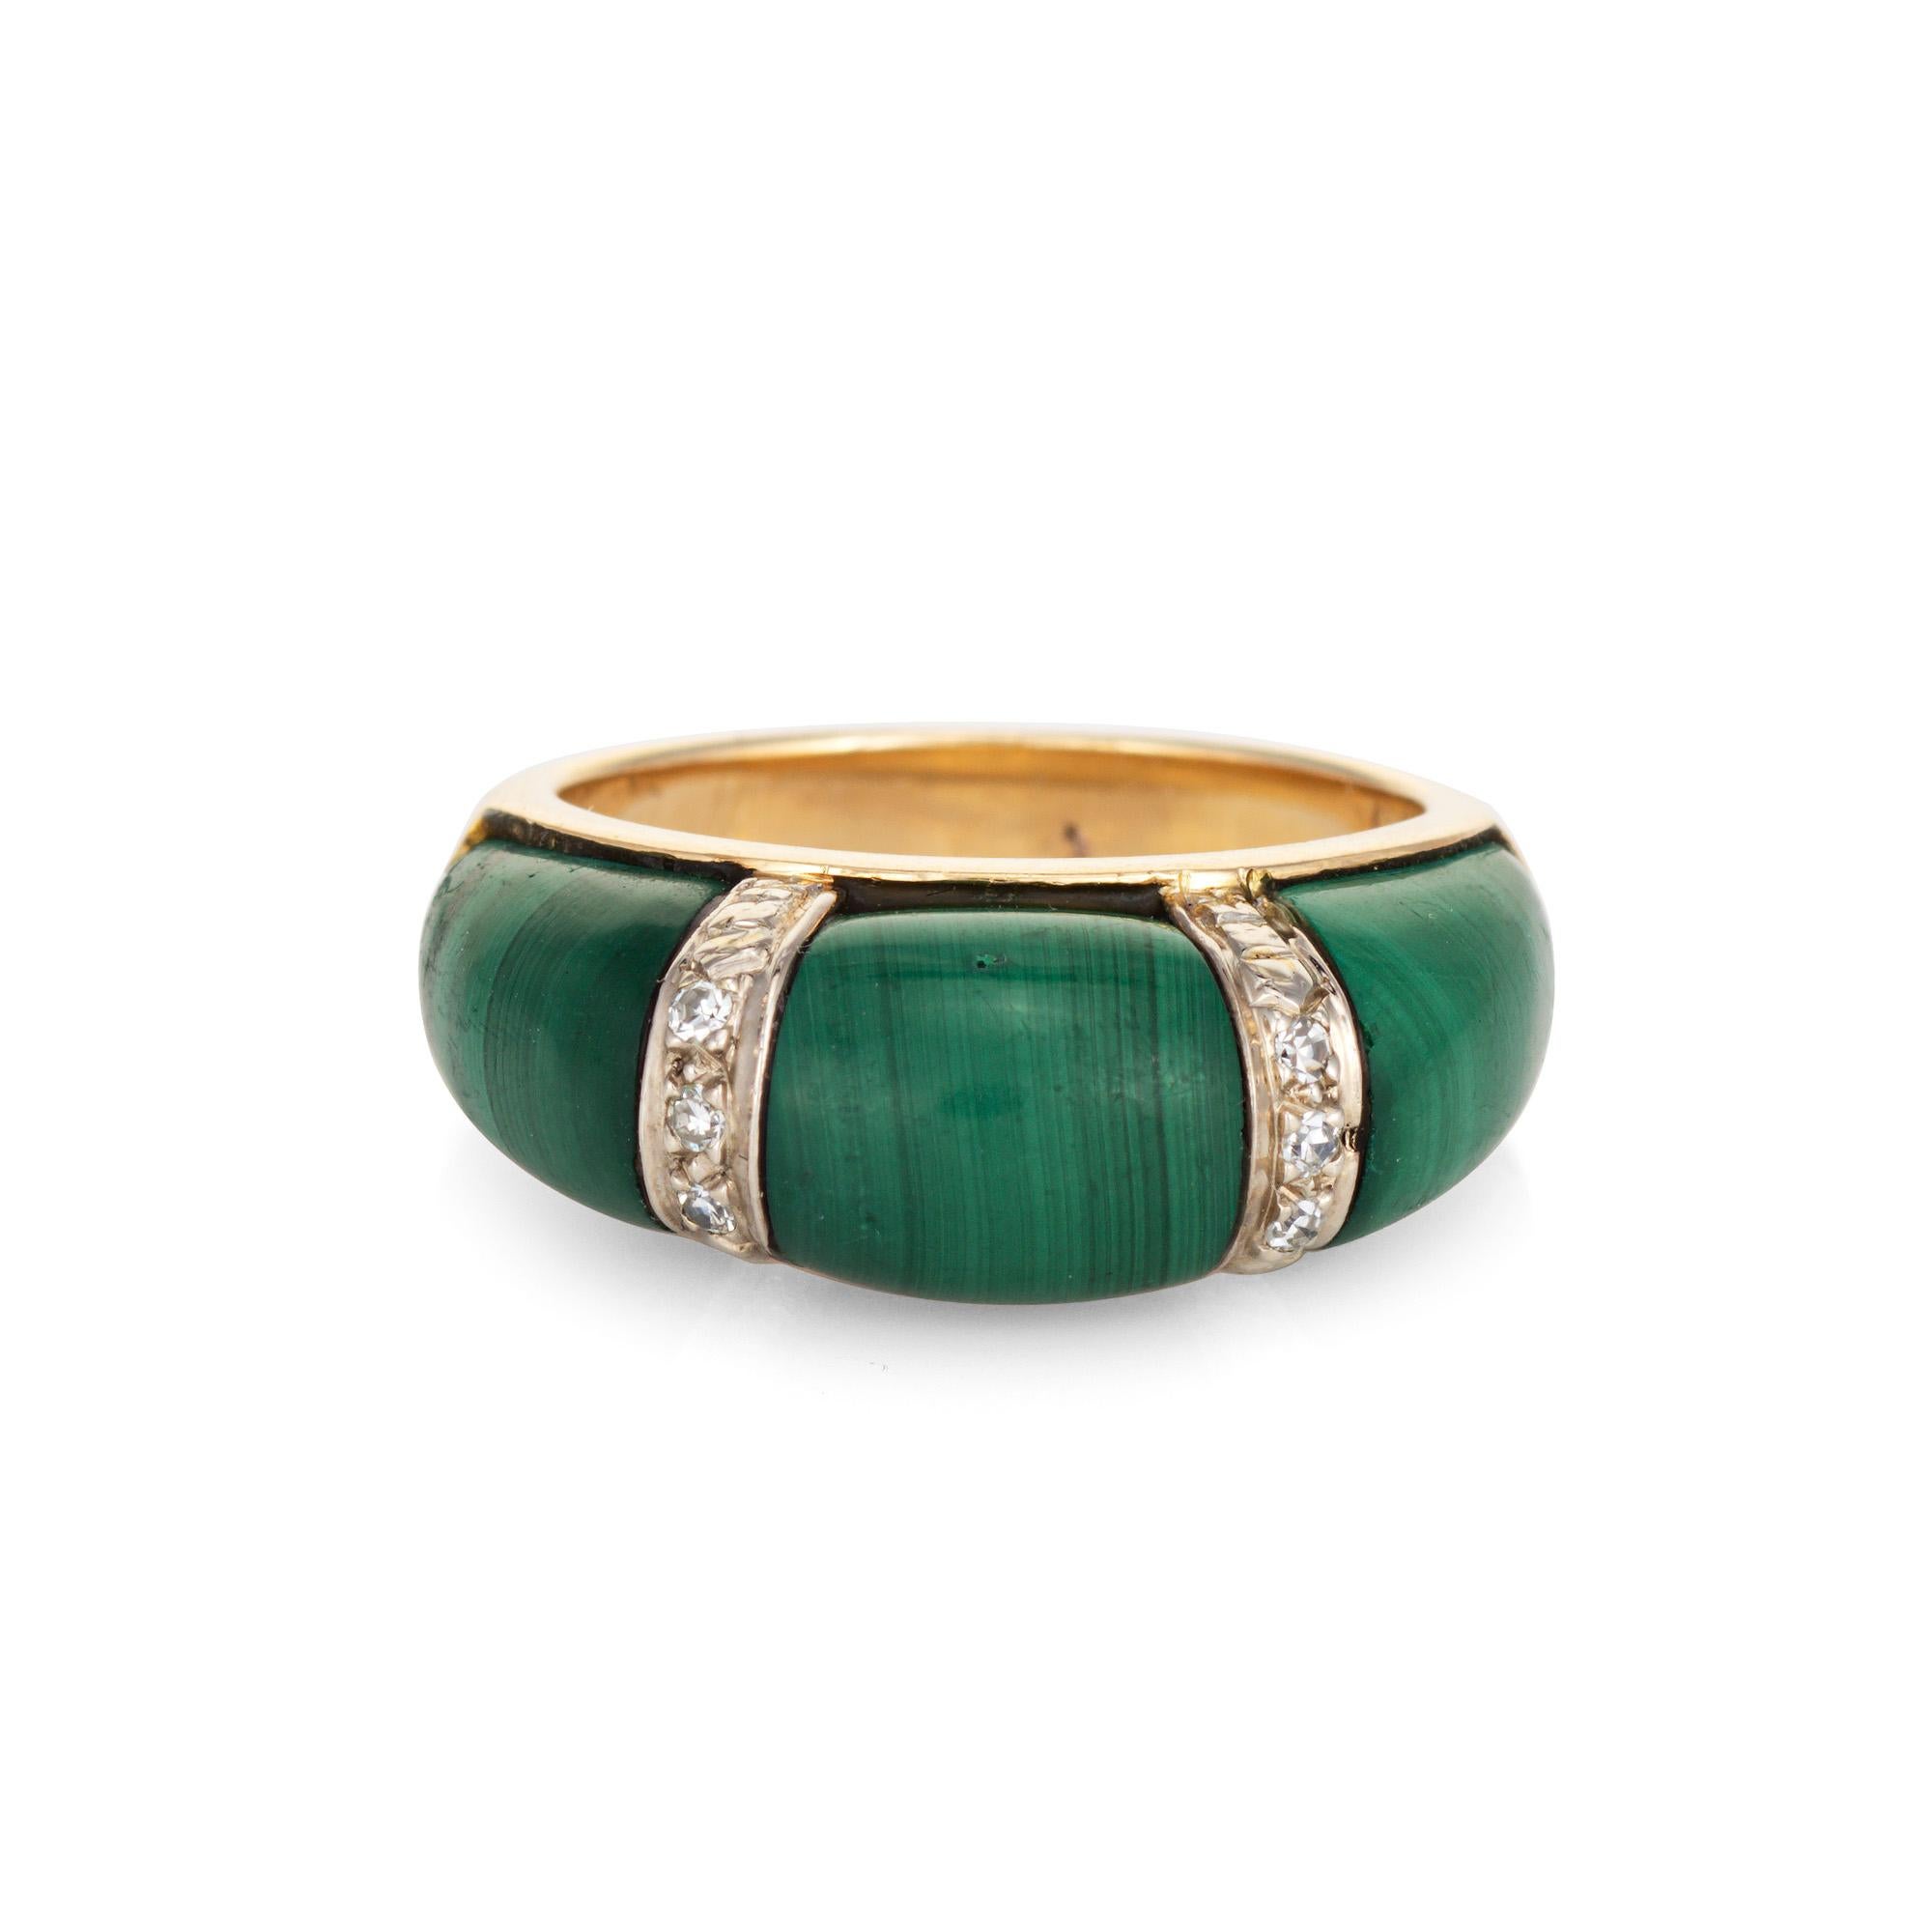 Stylish malachite & diamond dome ring crafted in 14 karat yellow gold (circa 1970s). 

Diamonds total an estimated 0.03 carats (estimated at H-I color and SI1-I1 clarity). Malachite measures 7.5mm wide (in very good condition and free of cracks or